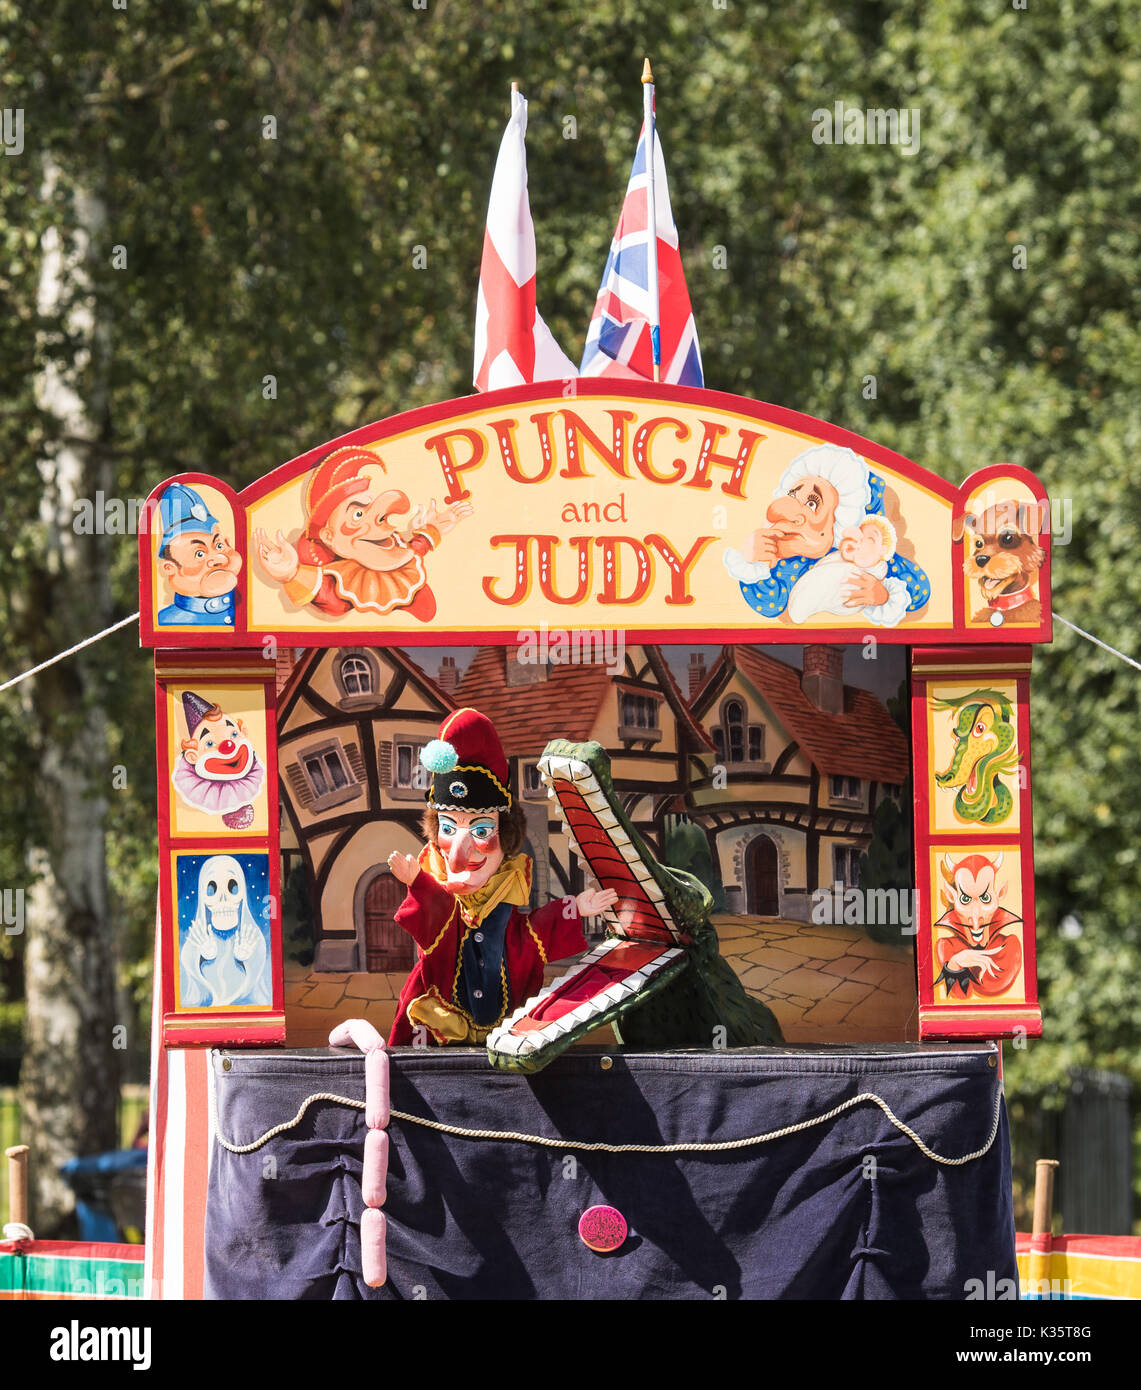 a traditional Punch and Judy show by David Wilde in an English park in the summer at Brentwood, Essex with the Mr Punch, Crocodile and sausages+ Stock Photo